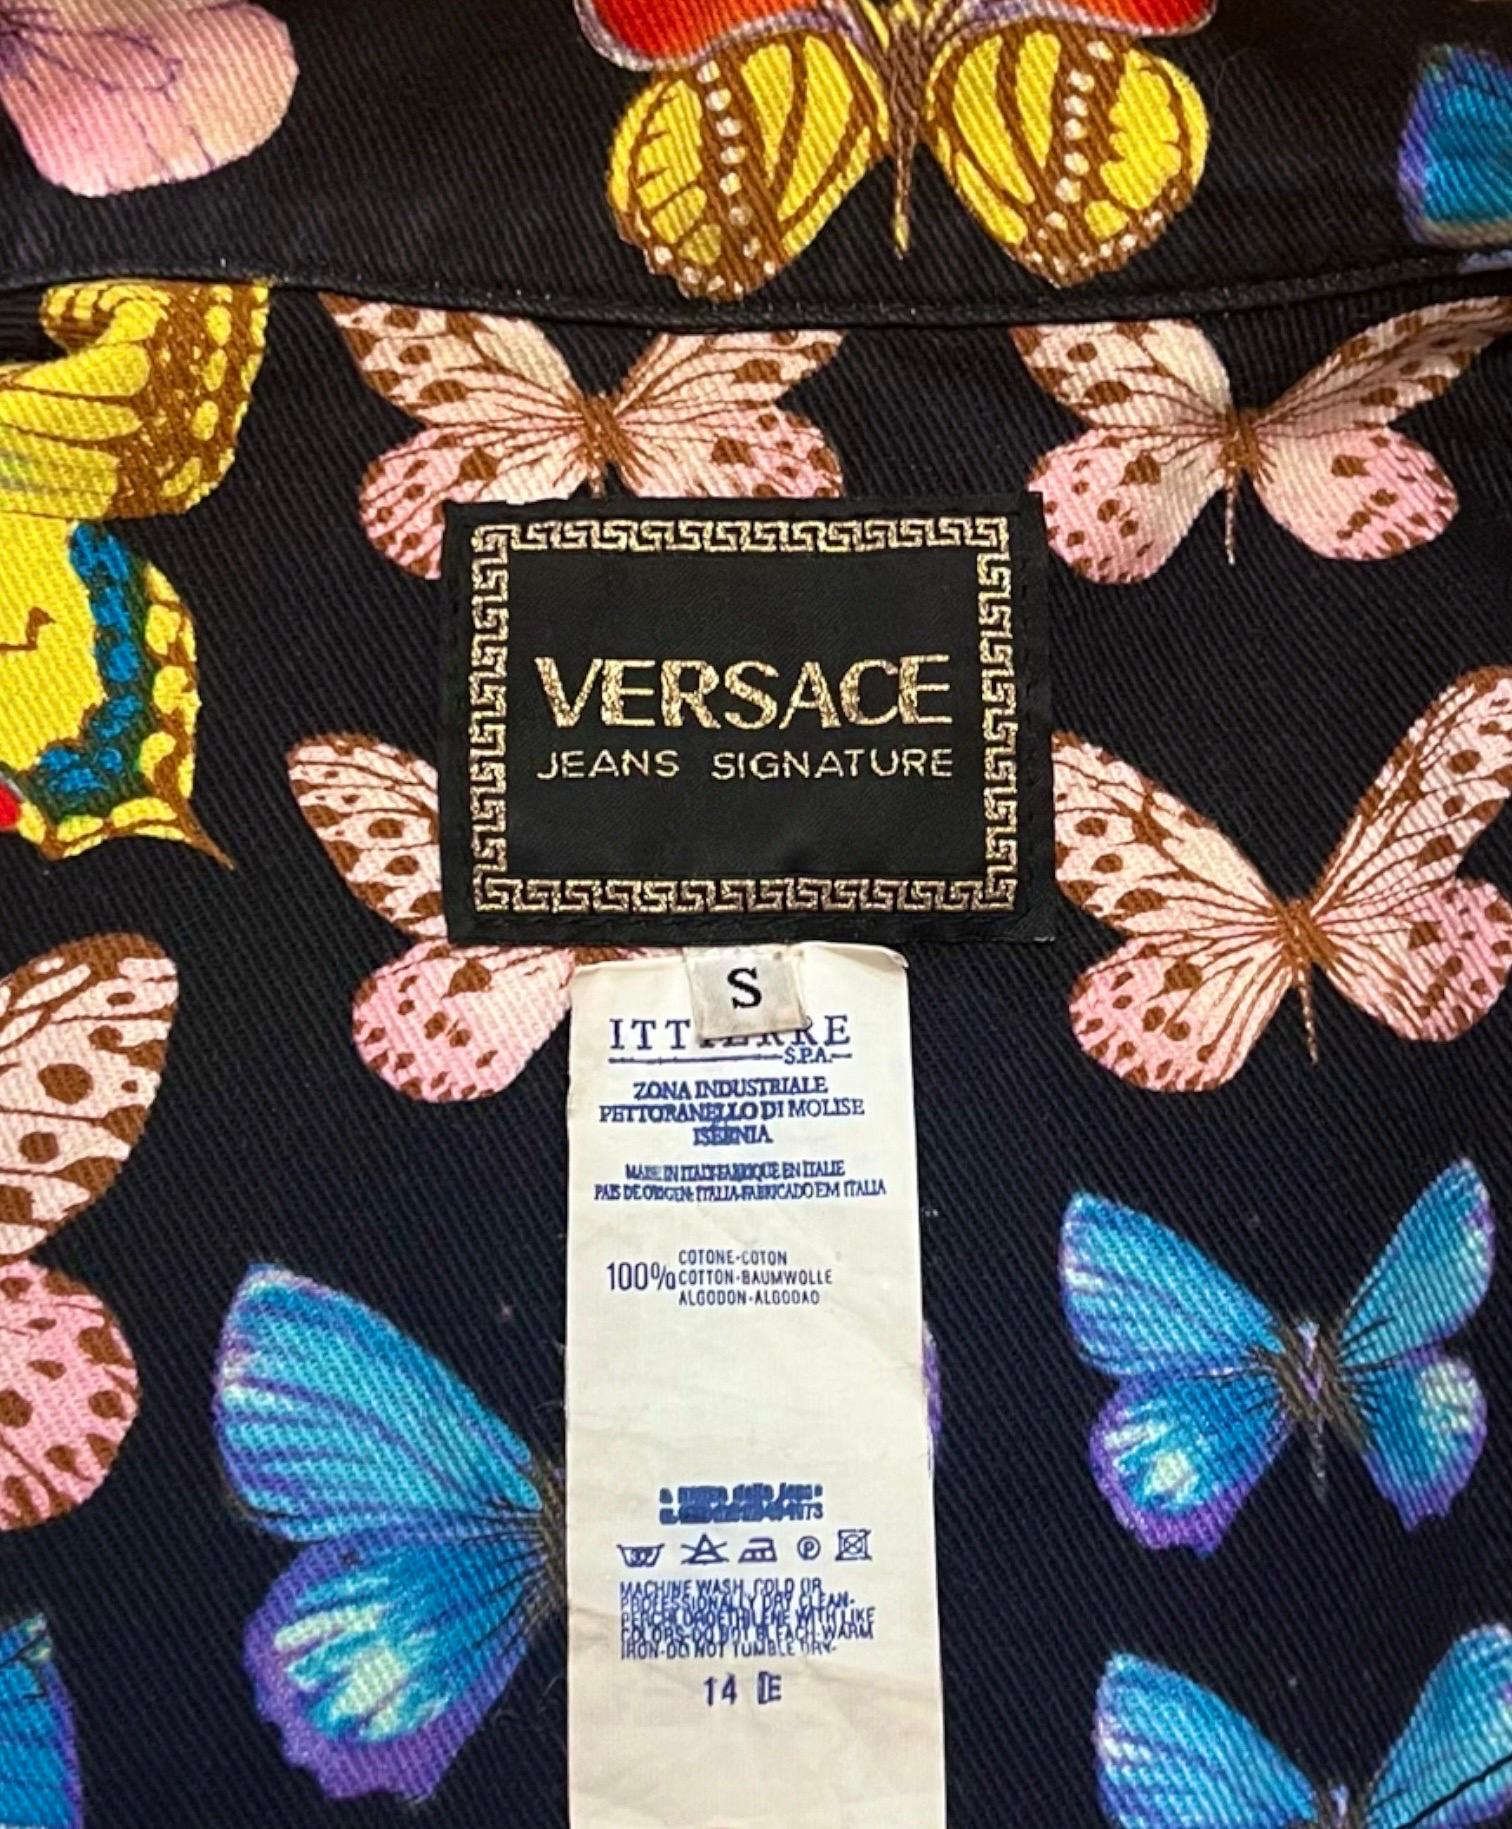 S/S 1995 Gianni Versace Butterfly Printed Jacket For Sale 4